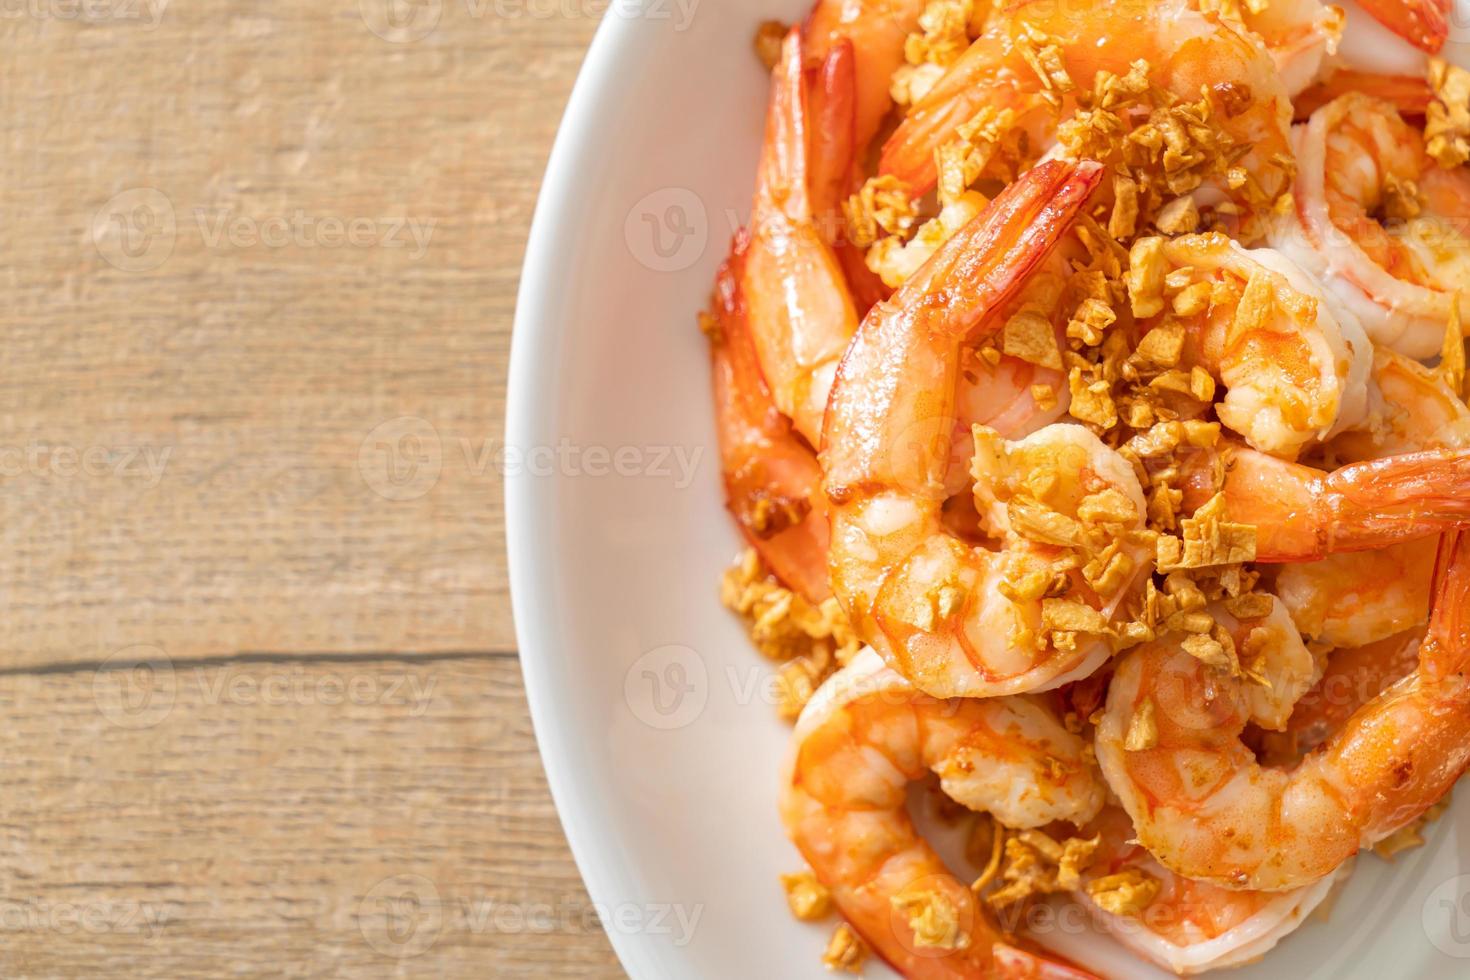 Fried shrimps or prawns with garlic on white plate - seafood style photo